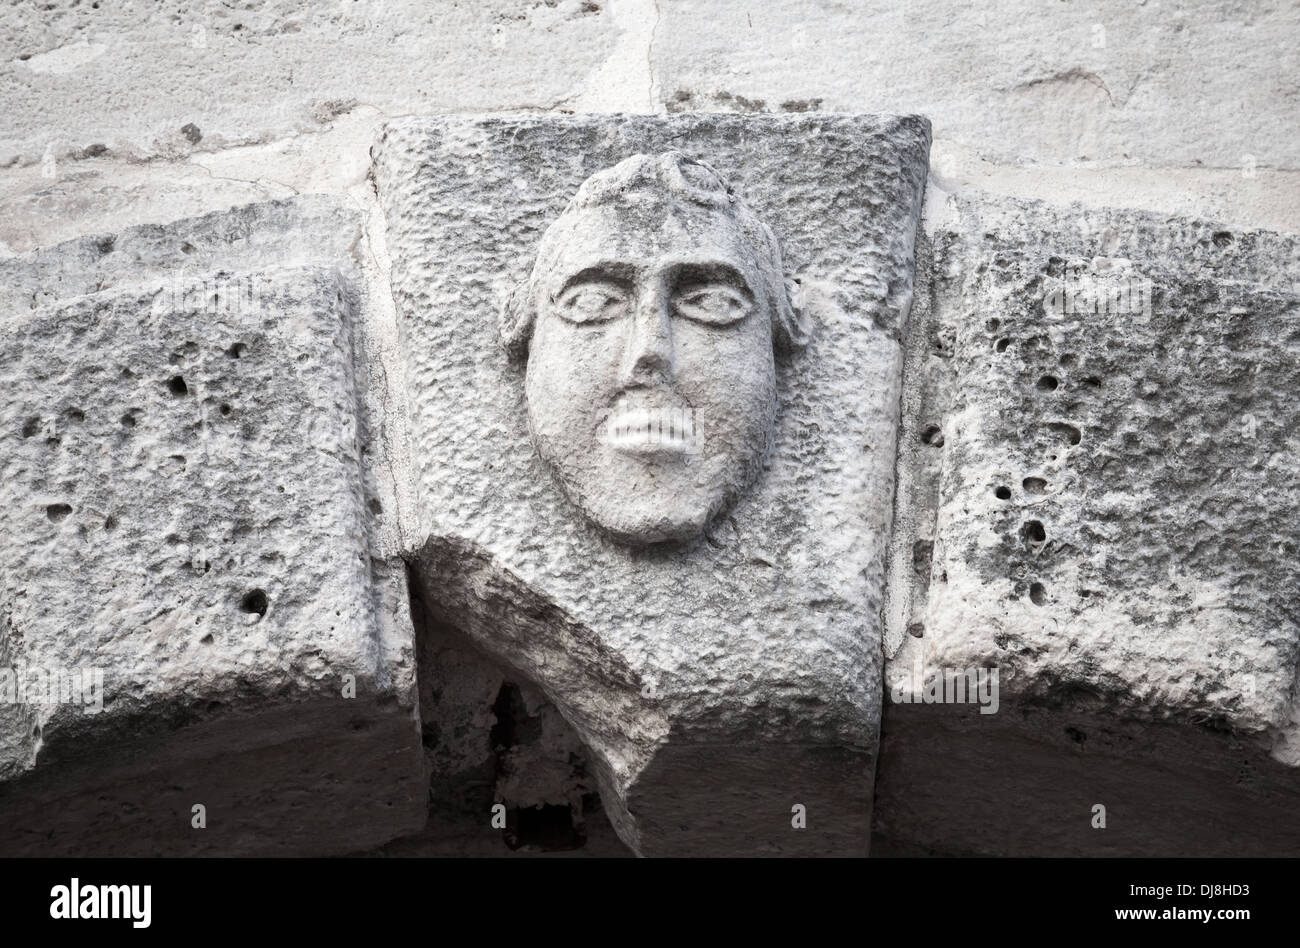 Bas-relief of a man's face on ancient house facade in Perast town, Montenegro Stock Photo